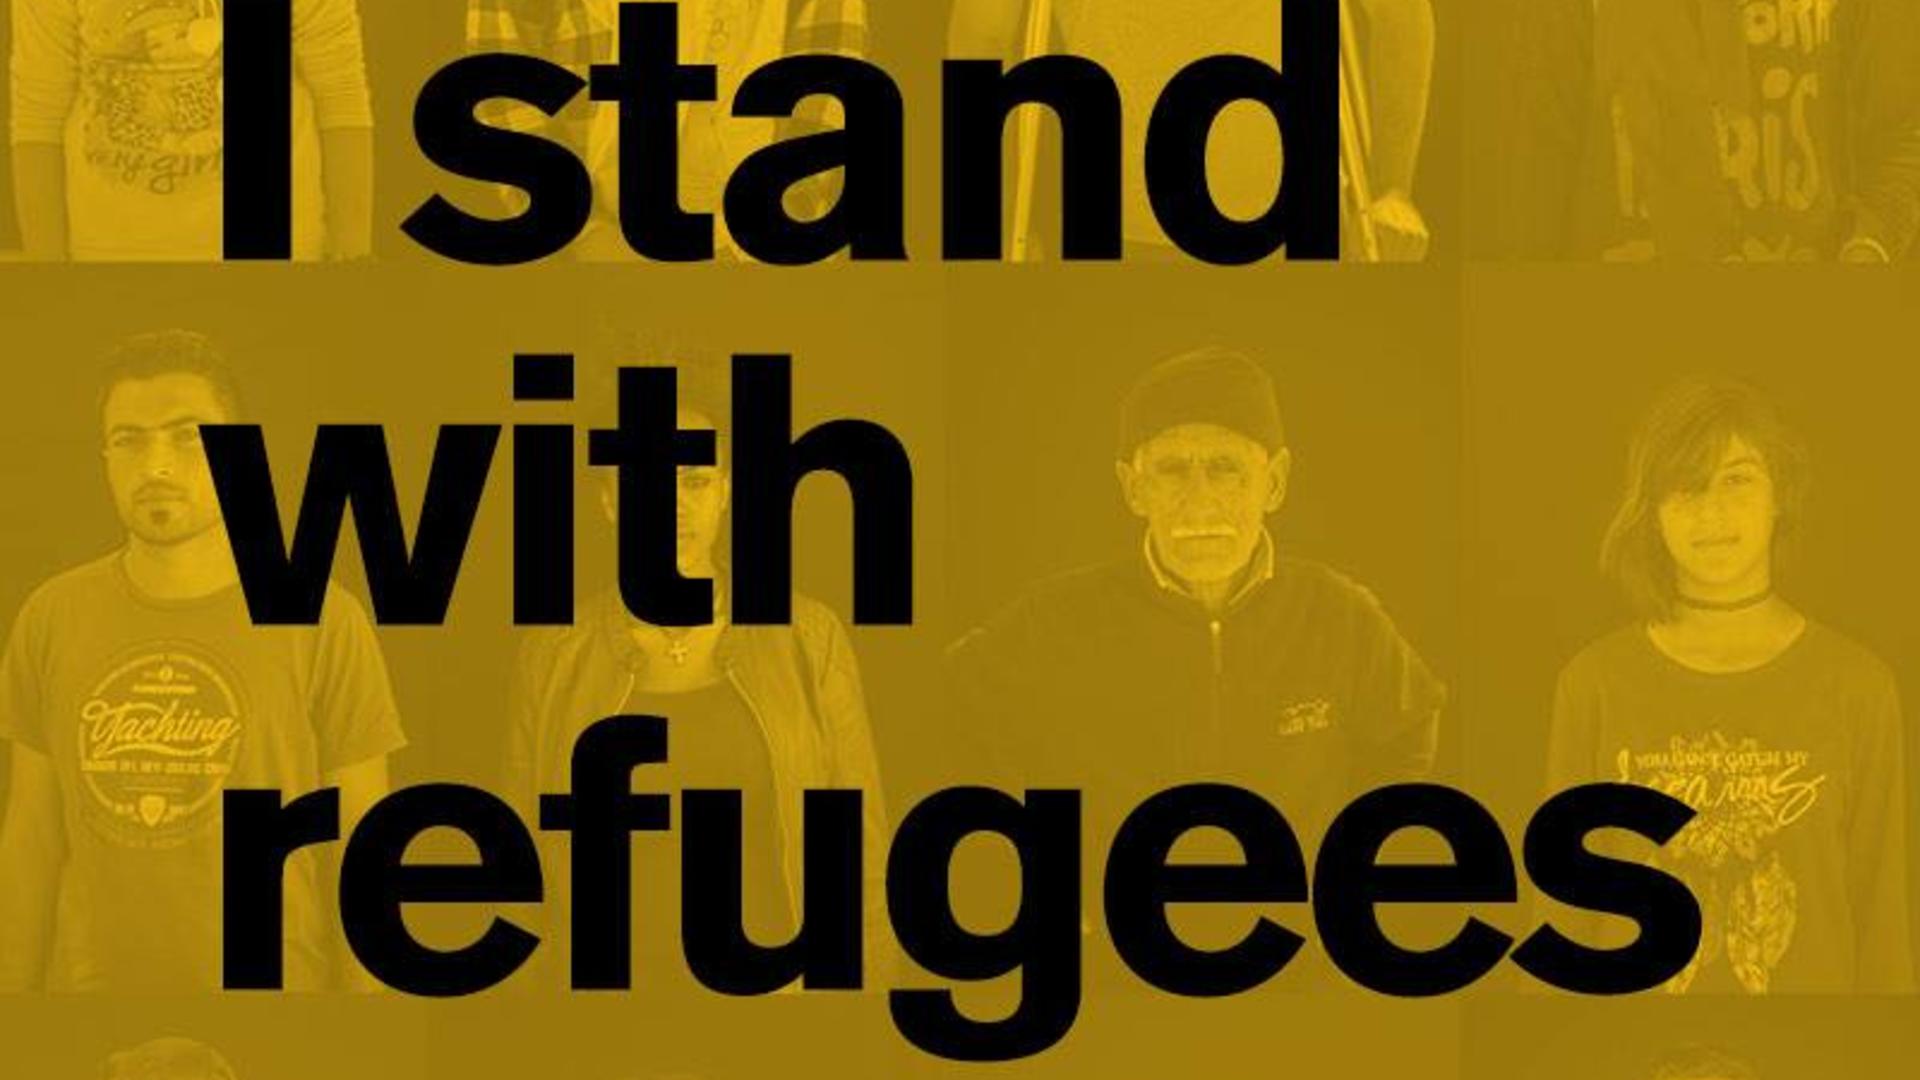 "I stand with refugees" graphic